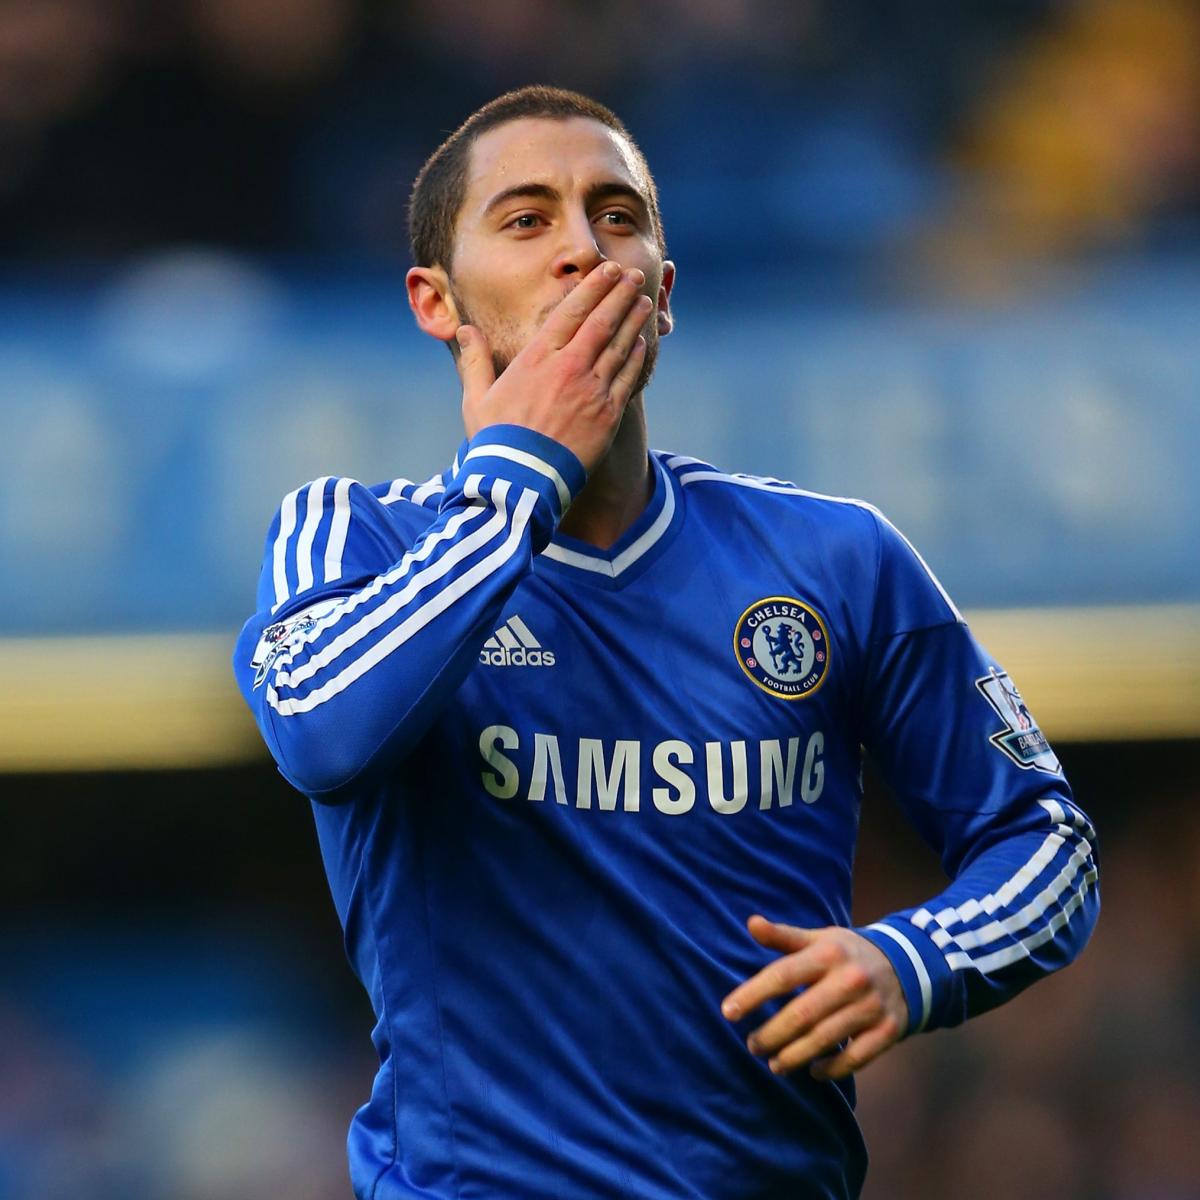 Eden Hazard / Cesc Fabregas tips Eden Hazard for Ballon d'Or : Eden hazard signed a revised deal with chelsea in january 2015 that will pay him an estimated $16 million a year through june 2020.